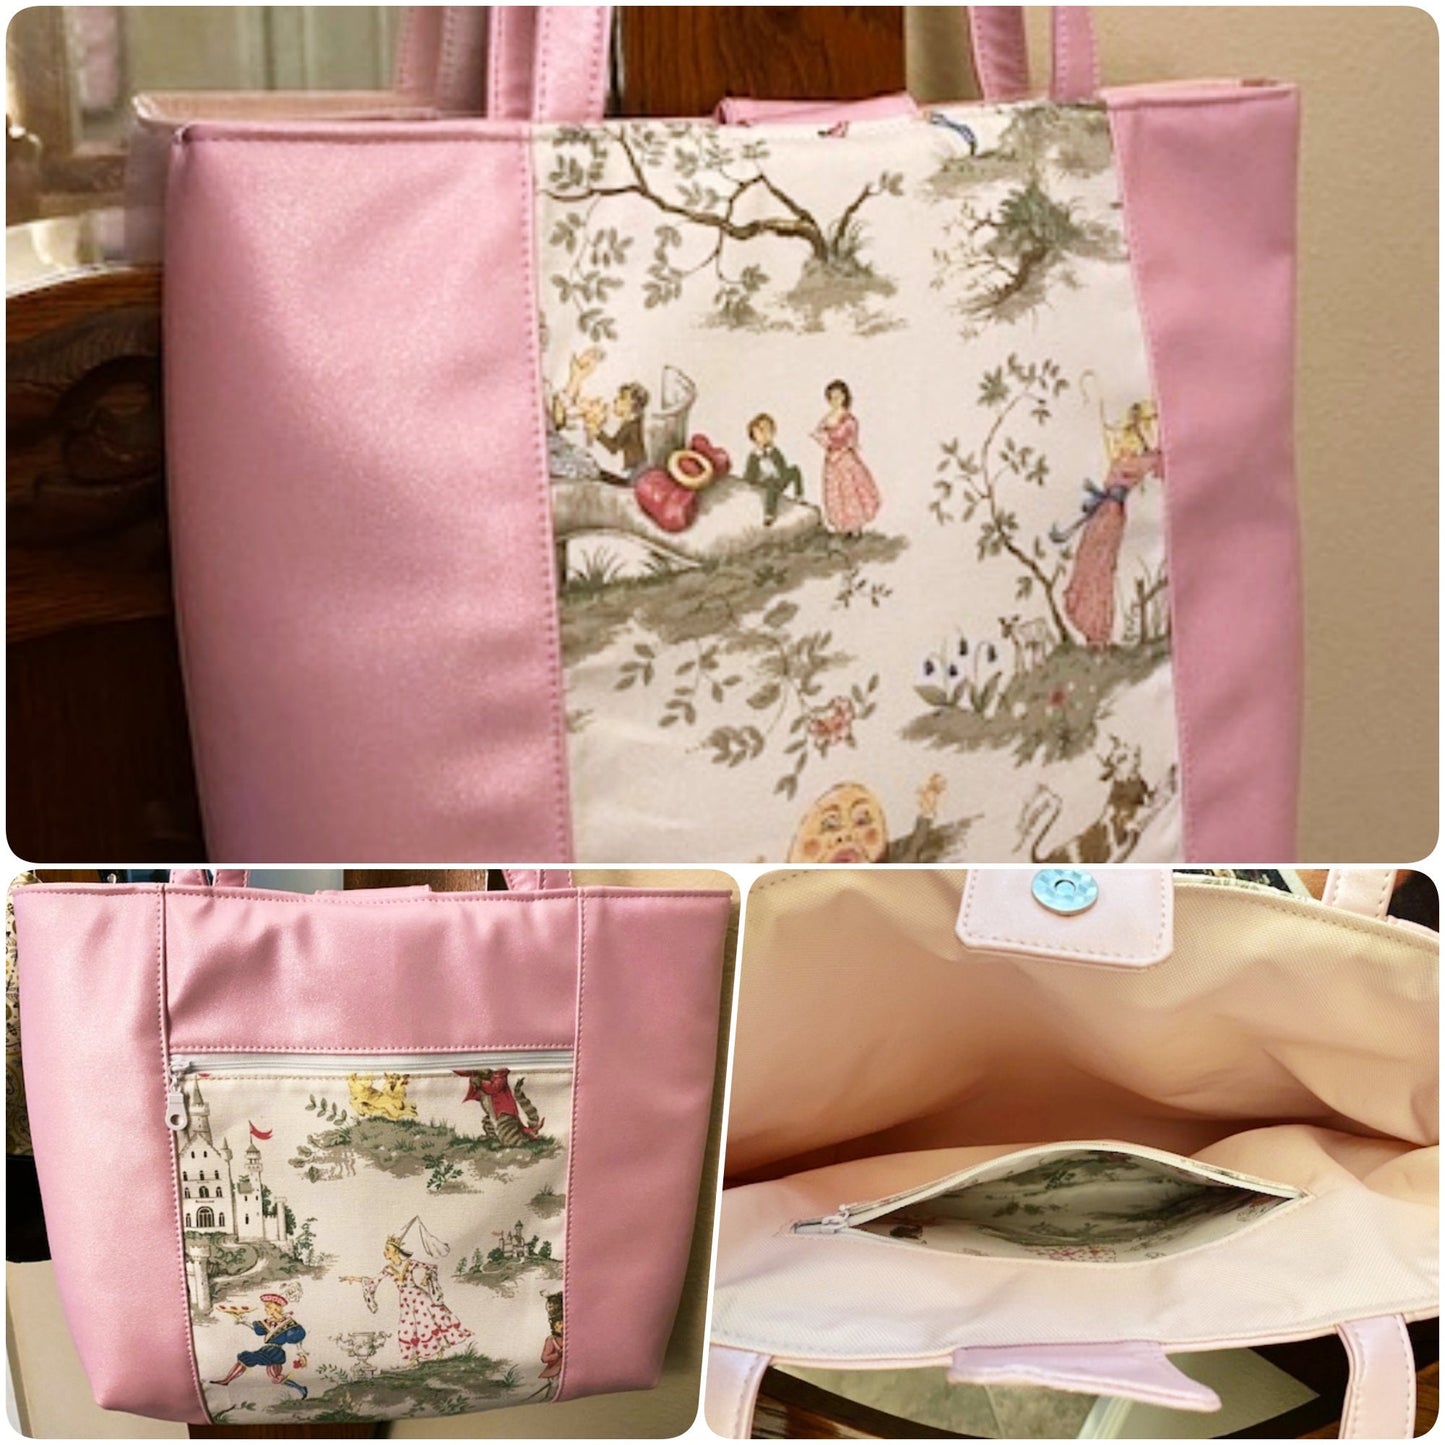 Medium Diaper Bag Tote Nursery Rhyme Toile Over the Moon Pink Shimmer Vinyl WPC Inside Zippered Pockets